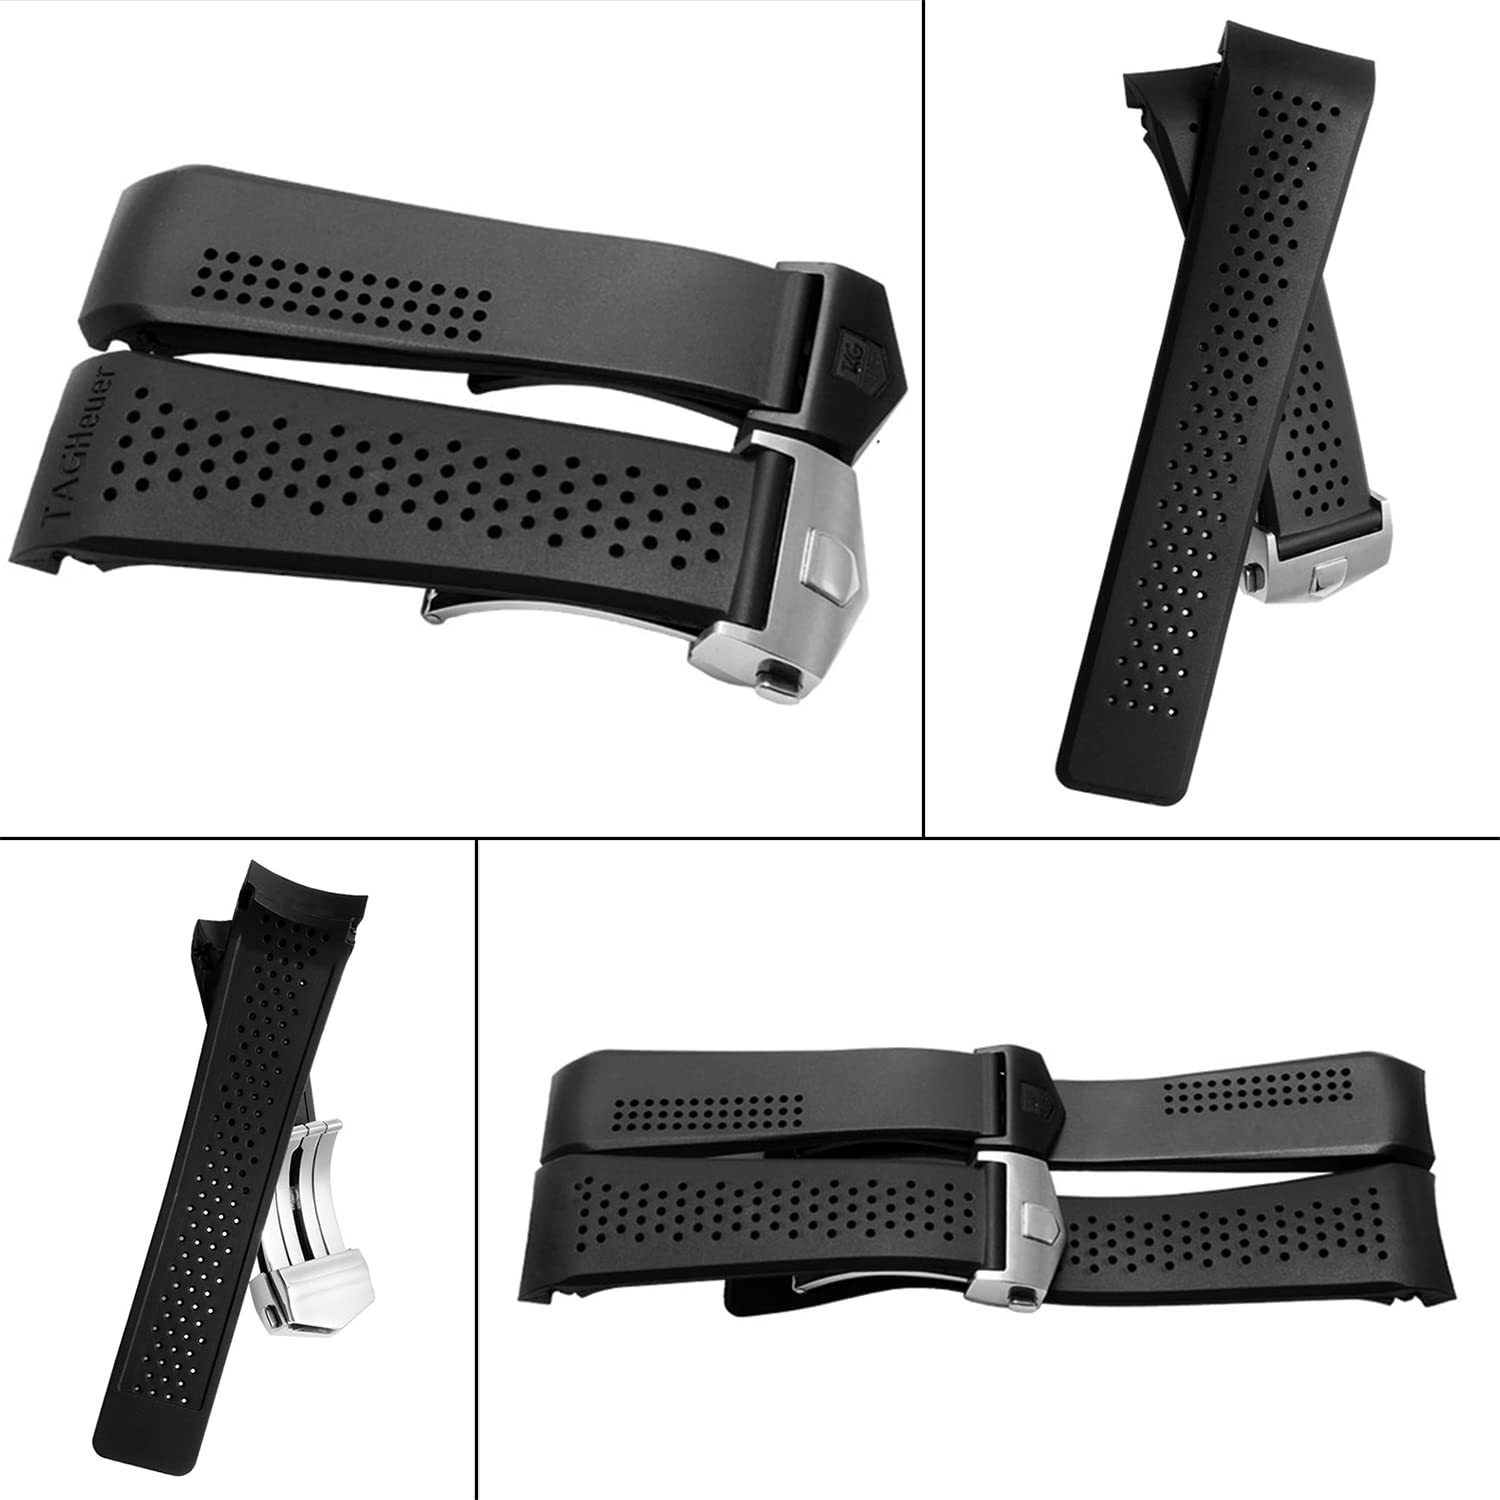 Nice Pies Men Soft Silicone Watch Band Military Strong Rubber Replacement Watch Strap with Stainless Steel Button Folding Table Buckle Waterproof Sport Wristband Black 22mm/24mm